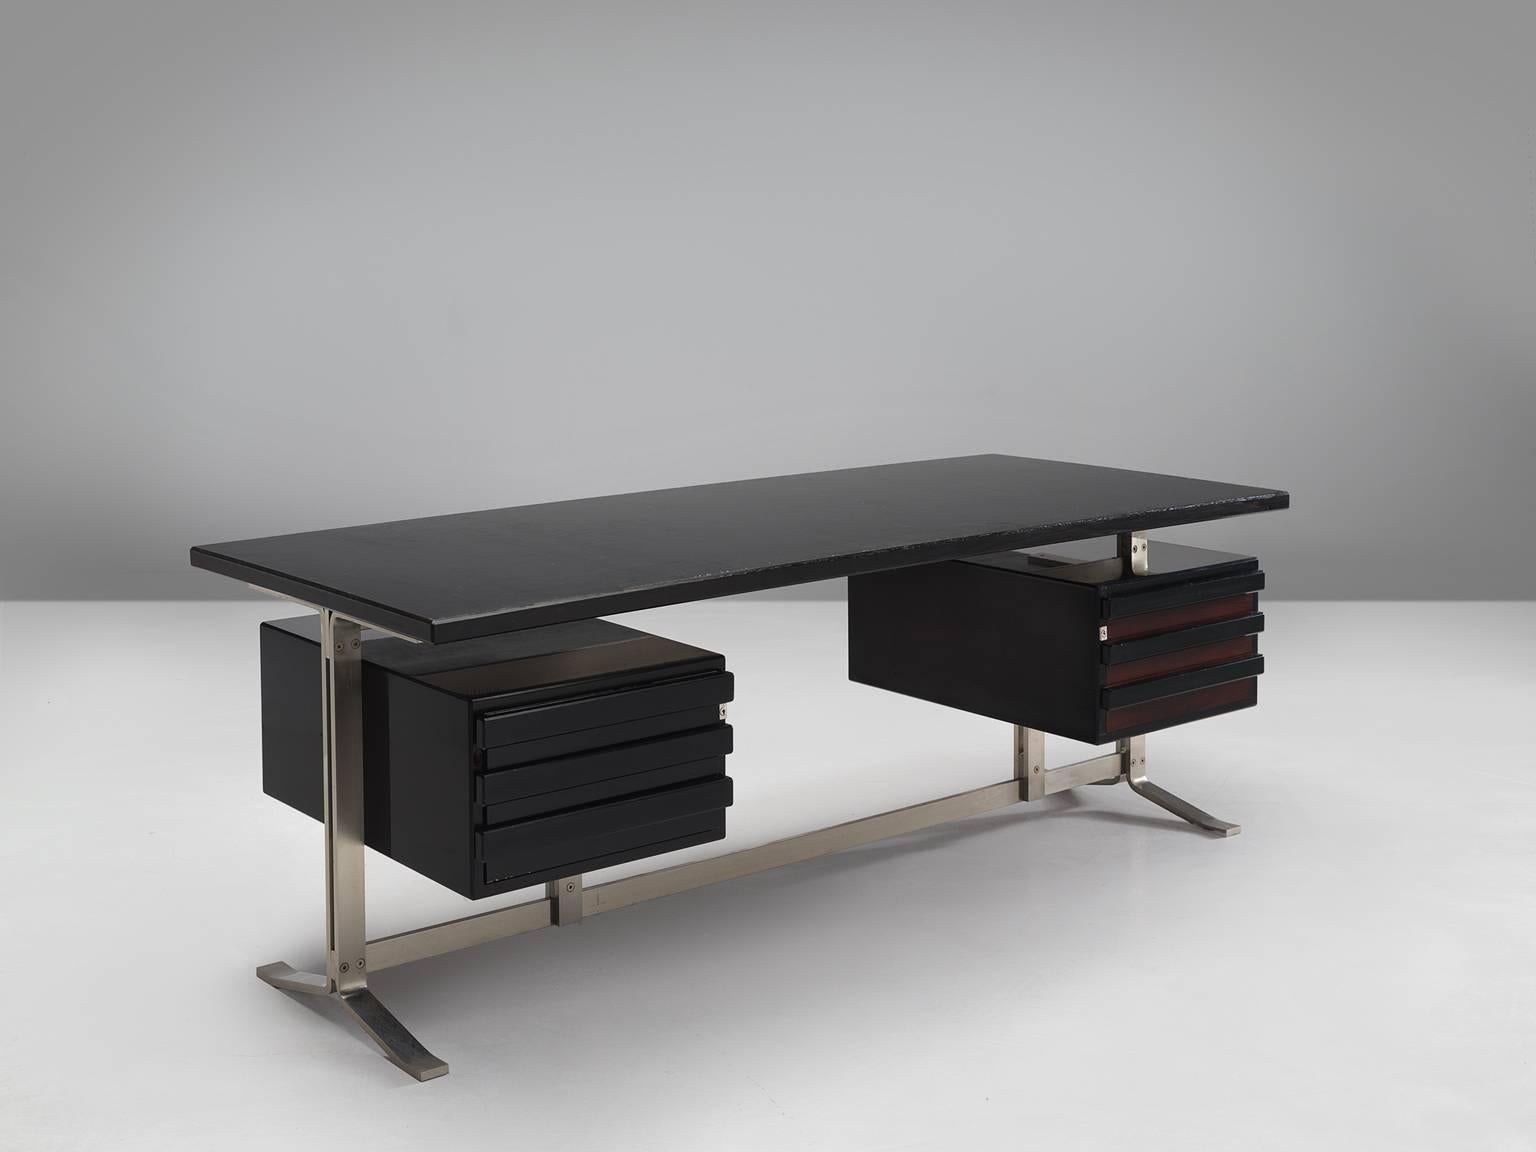 Gianni Moscatelli for Forma Nova, Minister's desk, steel and wood, Italy, 1969.

Minister's desk in black with rectangular top resting on two side boxes with a base in curved metal blades. The leg of the desk has a steel frame and two sled feet.